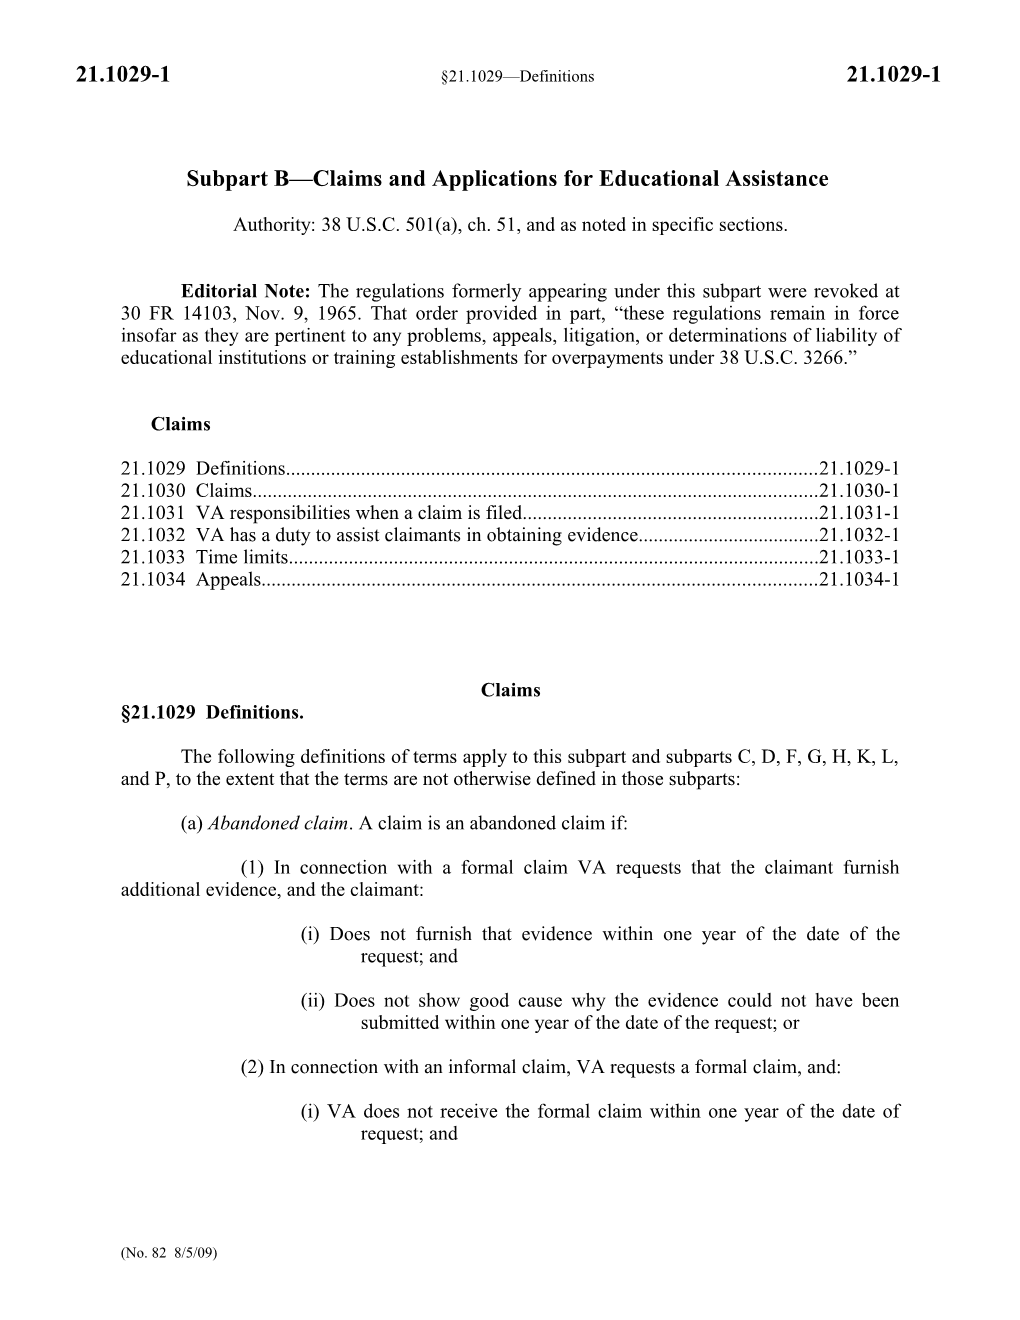 Subpart B Claims and Applications for Educational Assistance